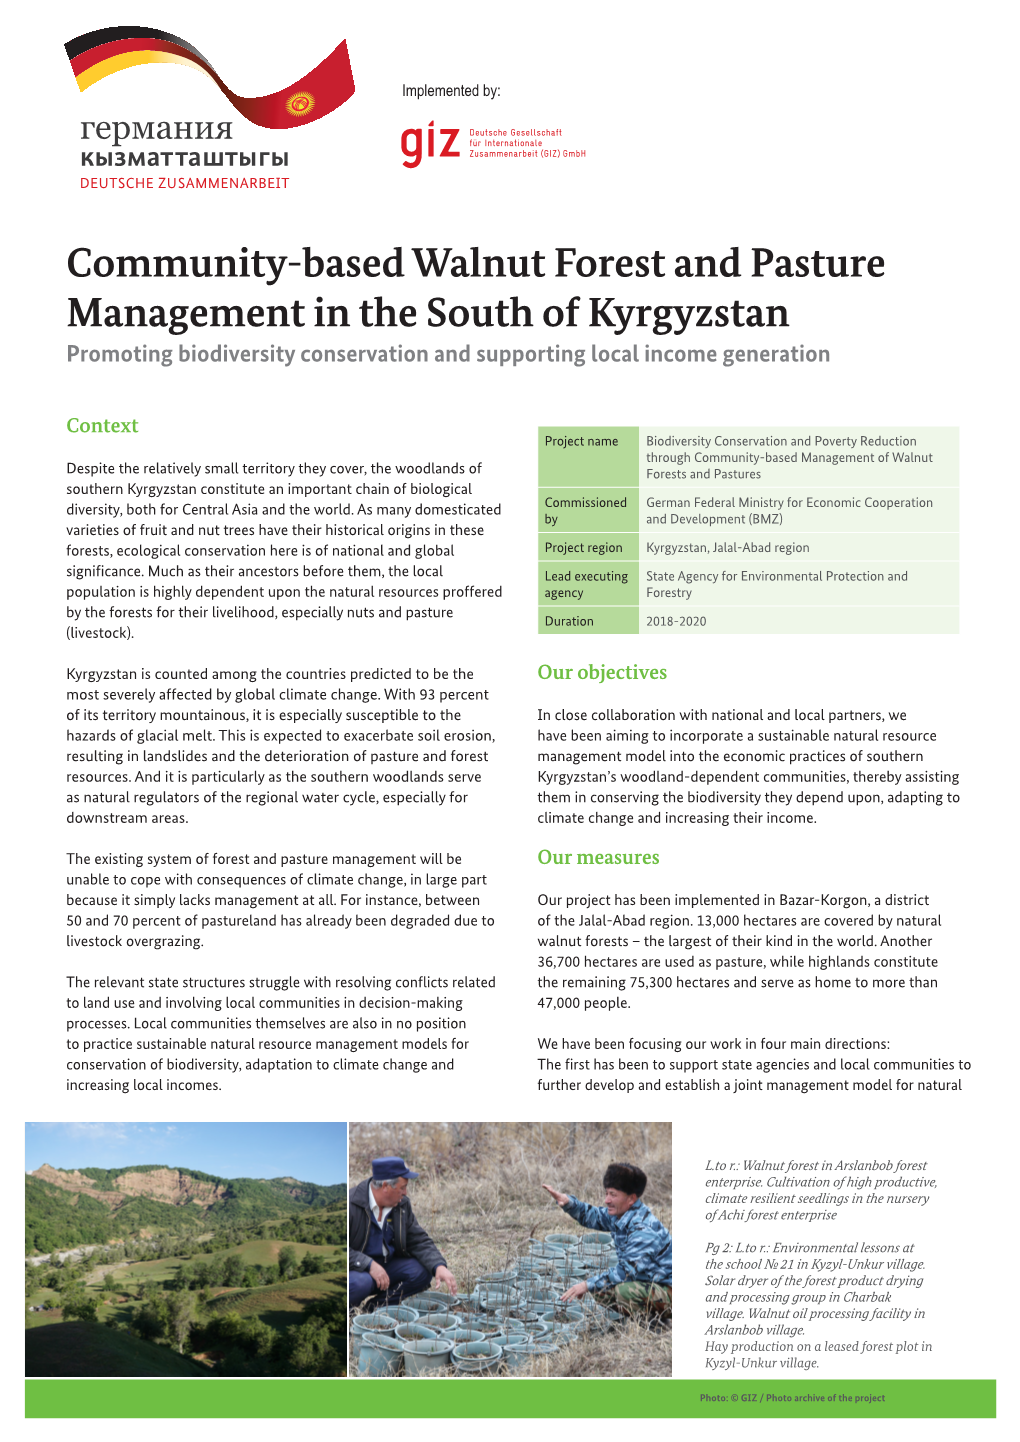 Community-Based Walnut Forest and Pasture Management in the South of Kyrgyzstan Promoting Biodiversity Conservation and Supporting Local Income Generation